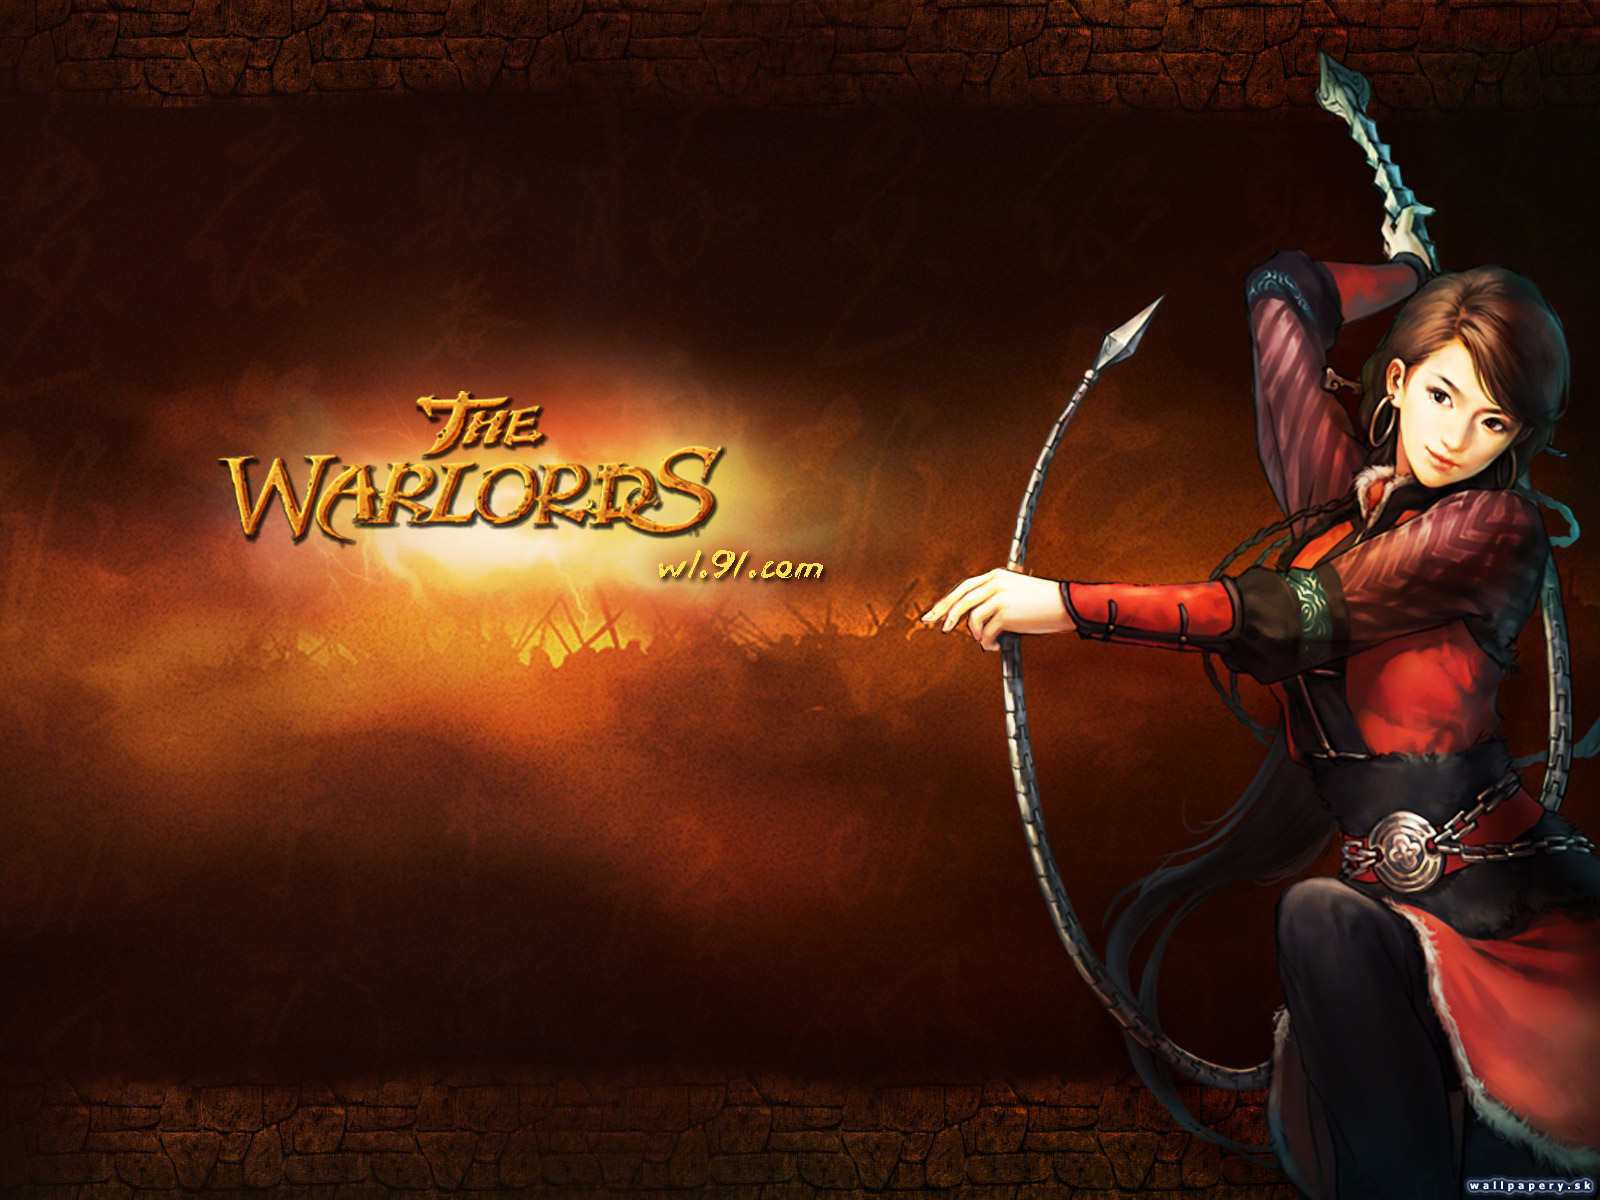 The Warlords - wallpaper 13